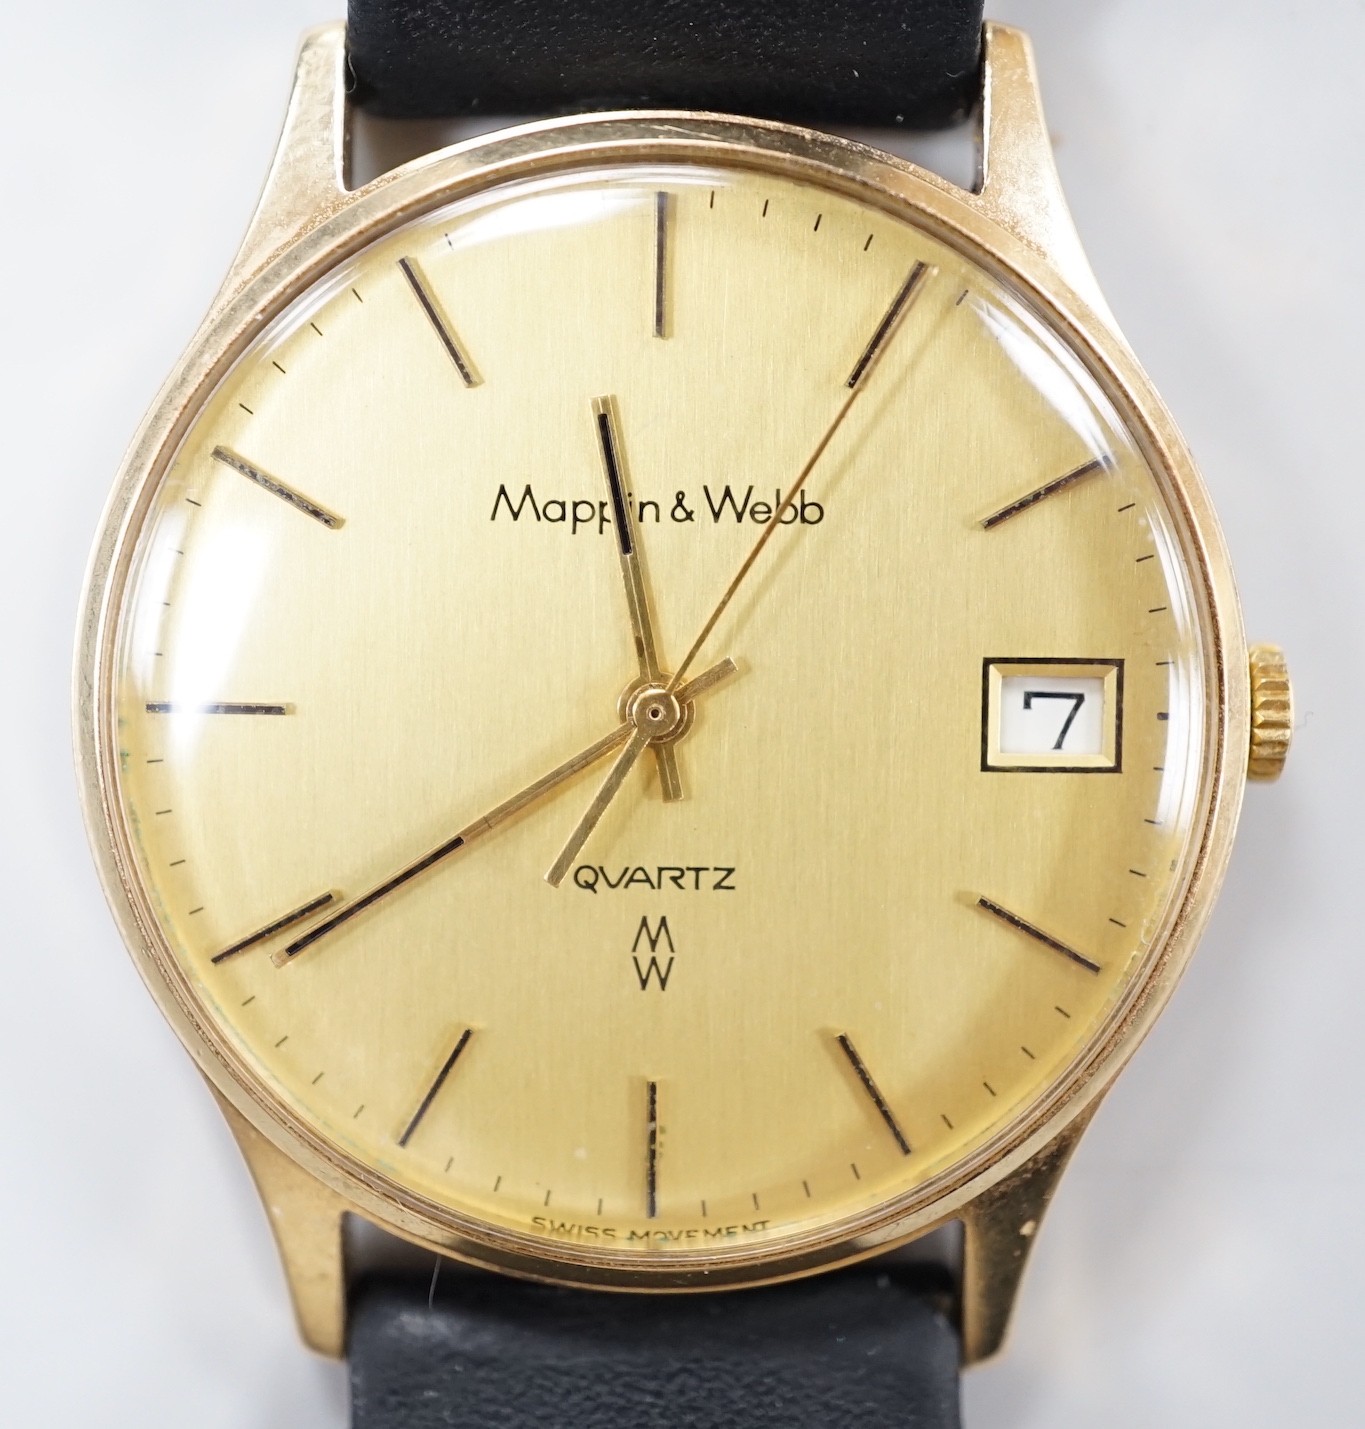 A gentleman's yellow metal quartz dress wrist watch, retailed by Mappin & Webb, with date aperture, case diameter 34mm, on a leather strap.